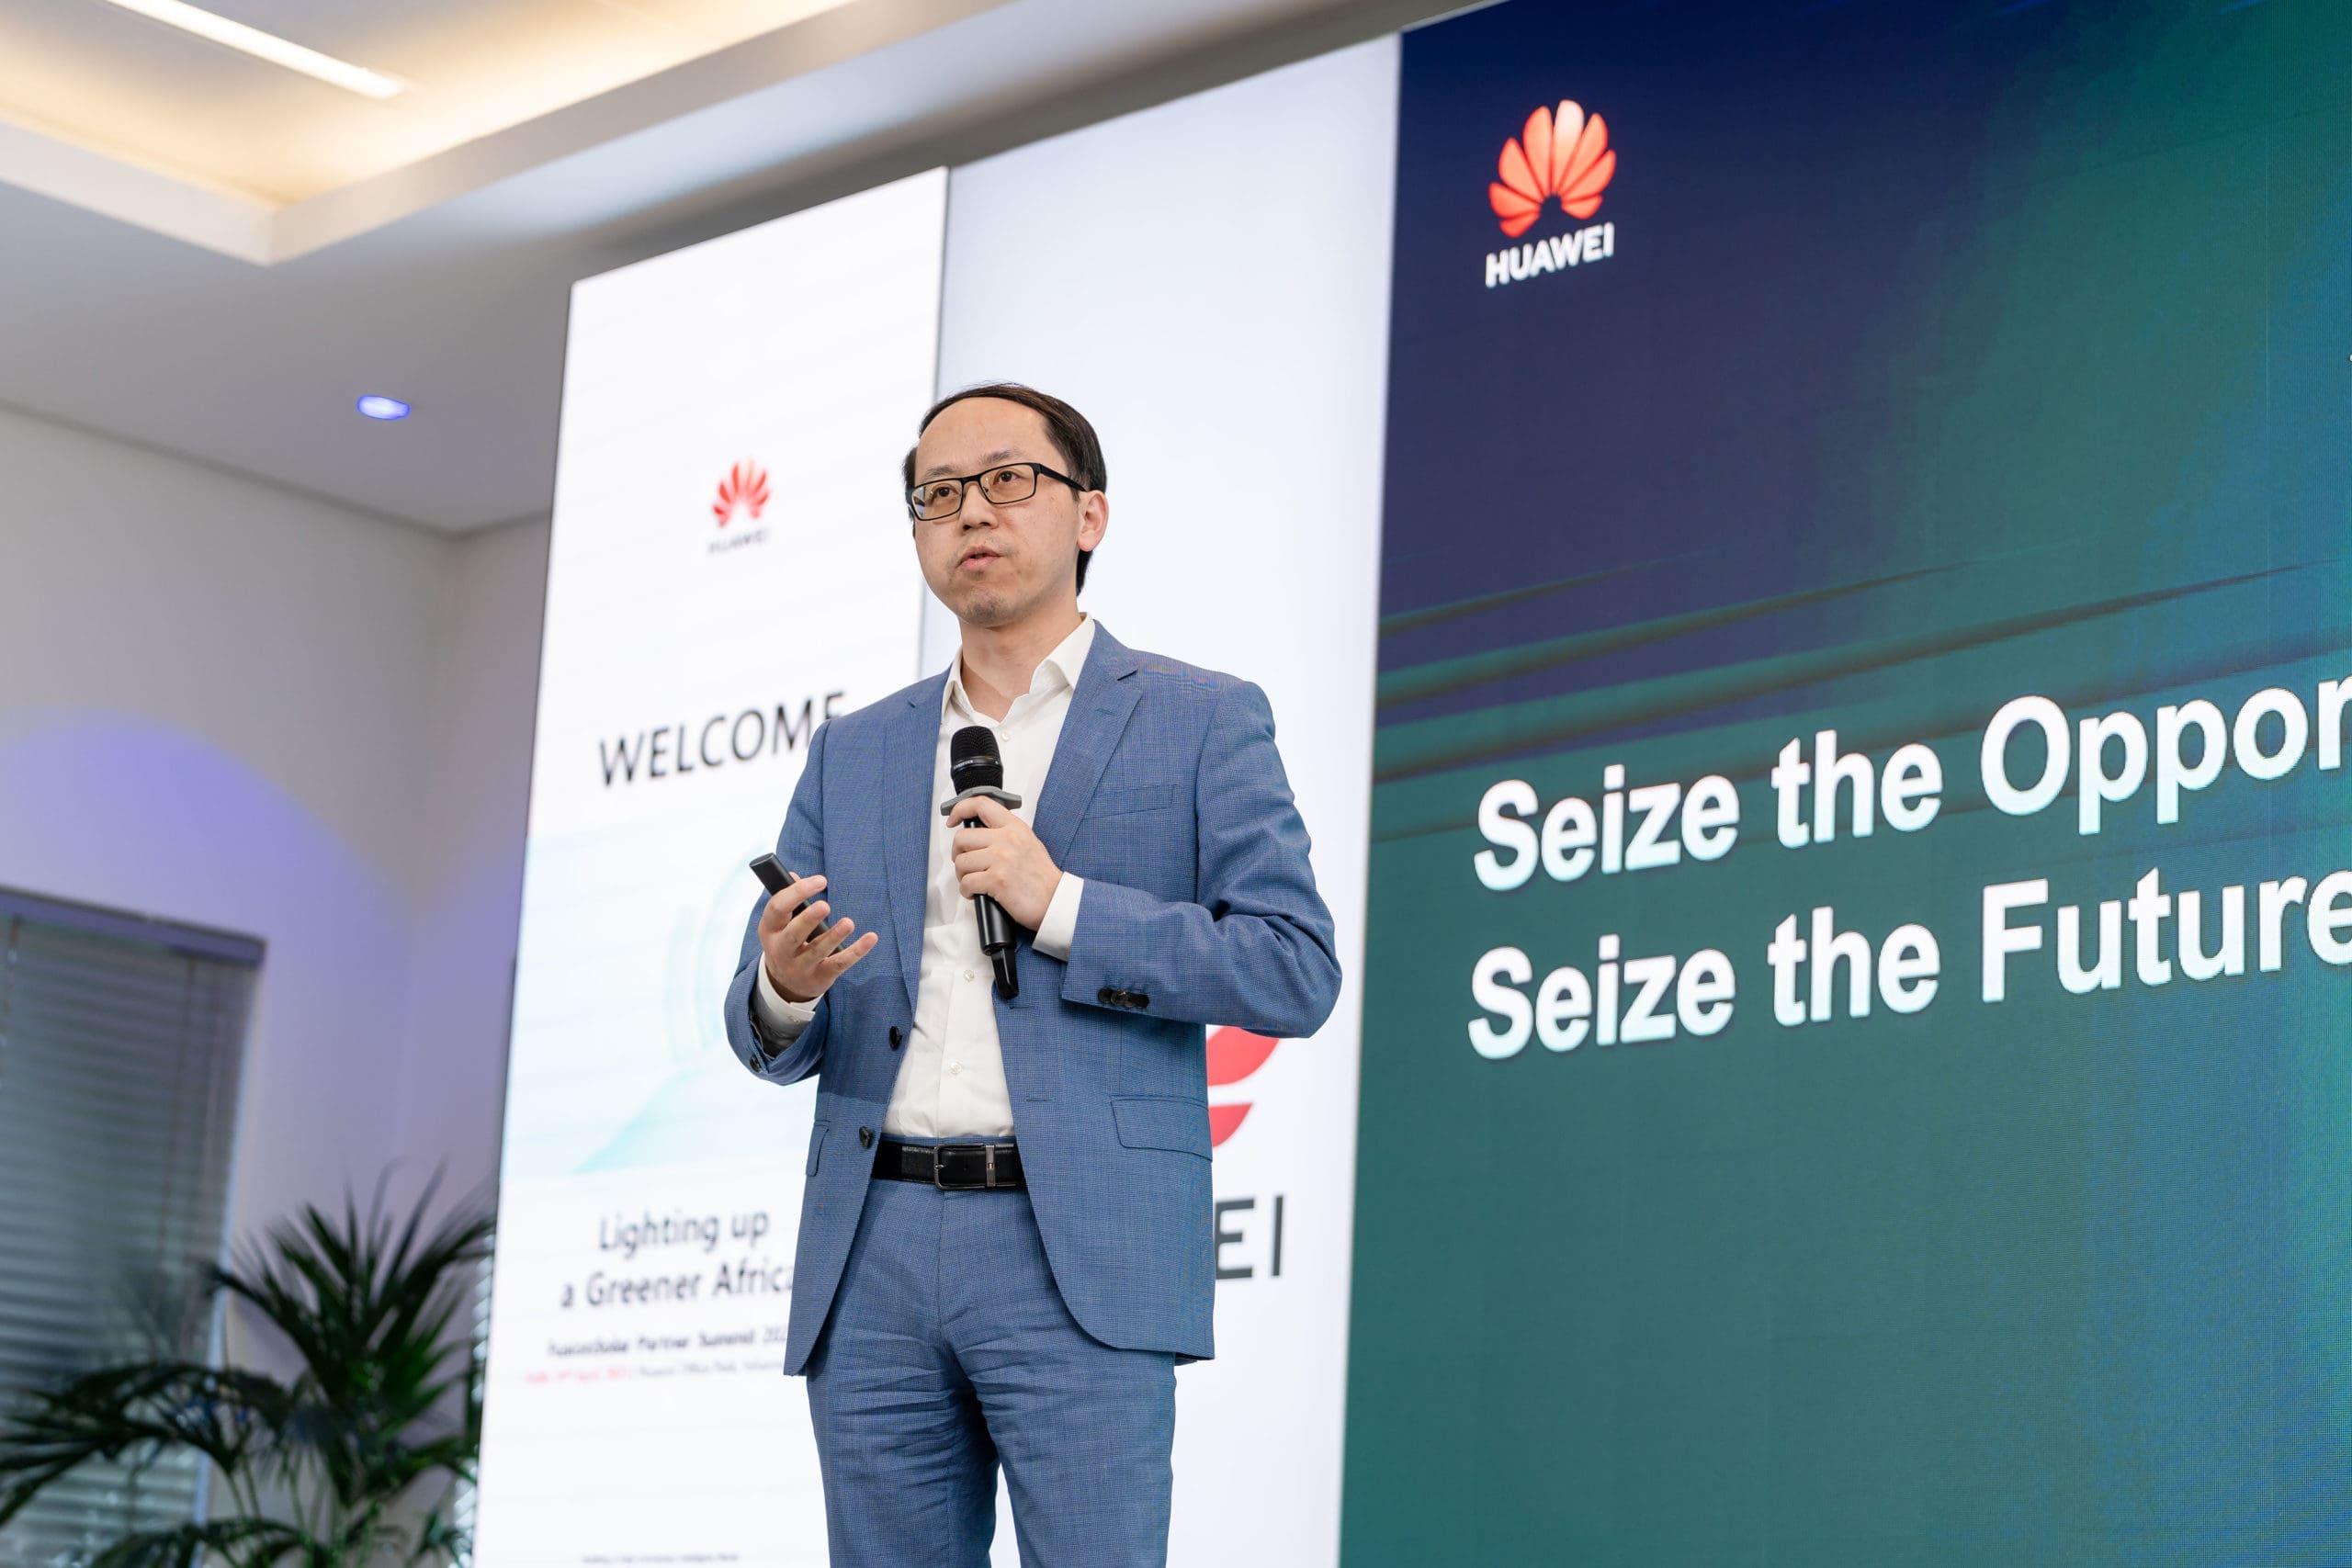 Chen Guoguang, President of the Huawei Smart PV Product Line